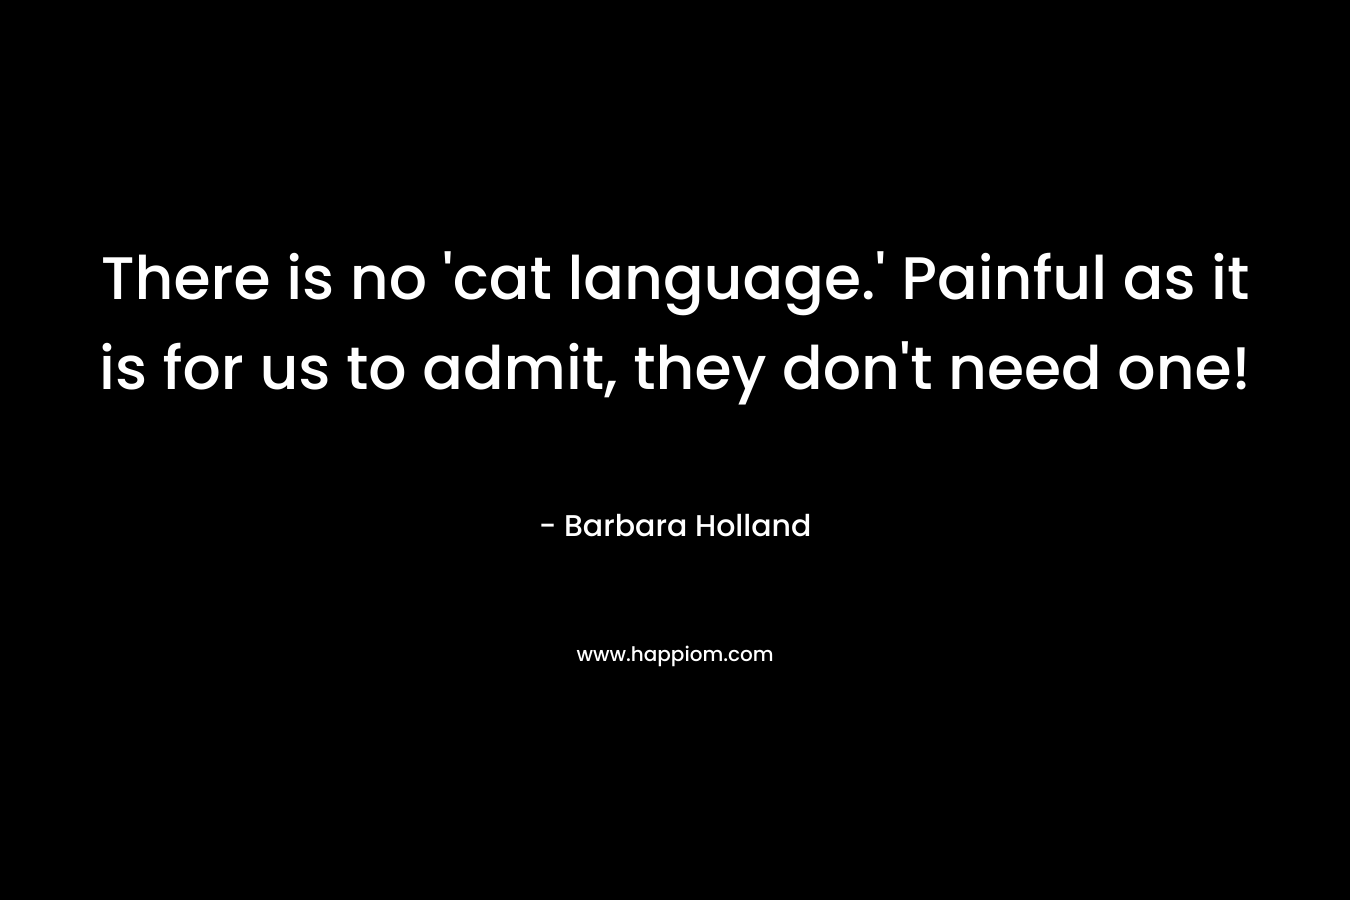 There is no 'cat language.' Painful as it is for us to admit, they don't need one!